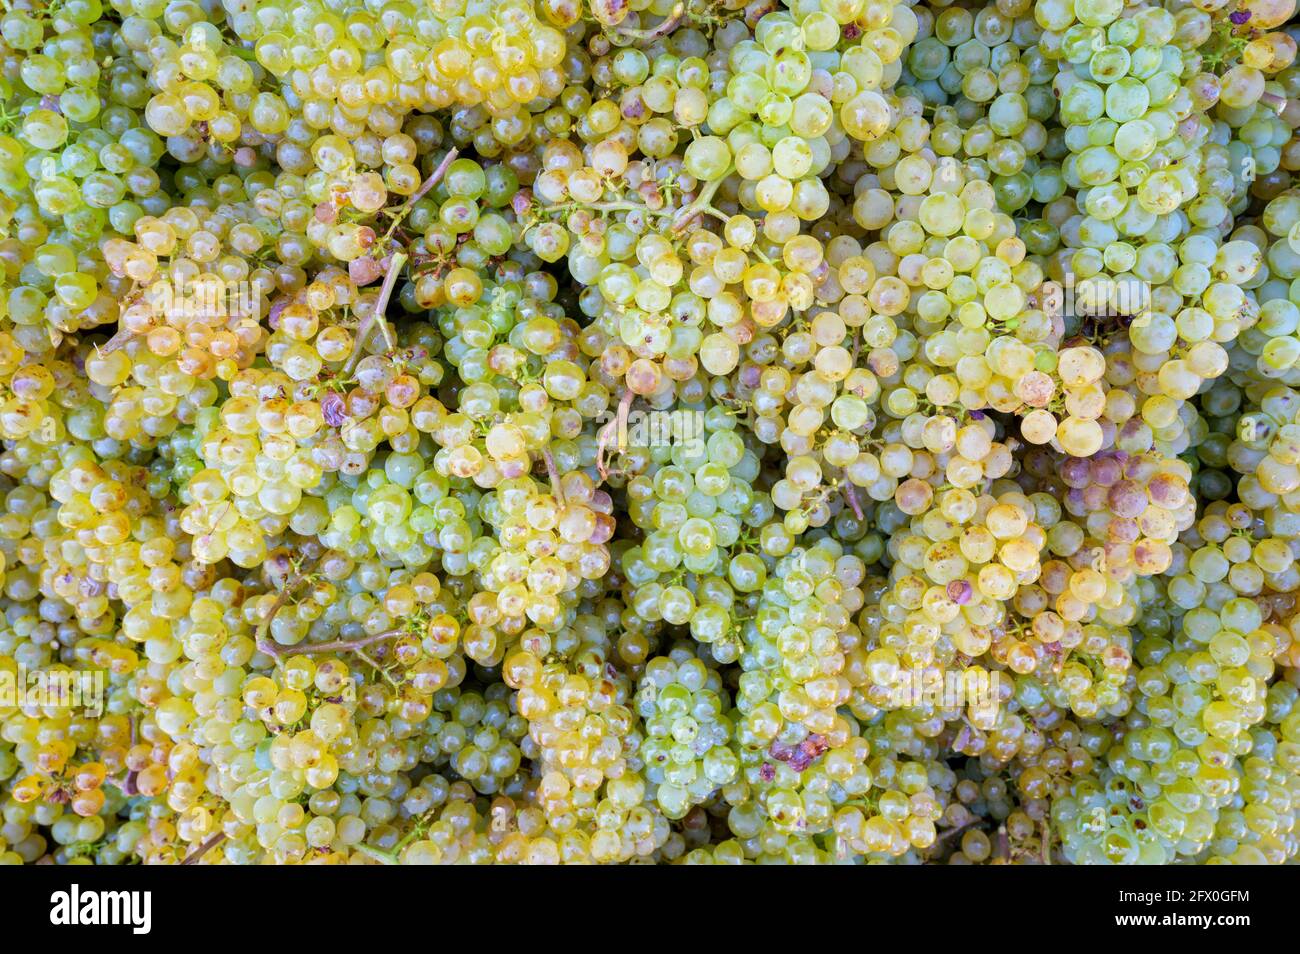 White grapes and vines harvest for winemaking, Neuweier, Black forest, Germany. Stock Photo